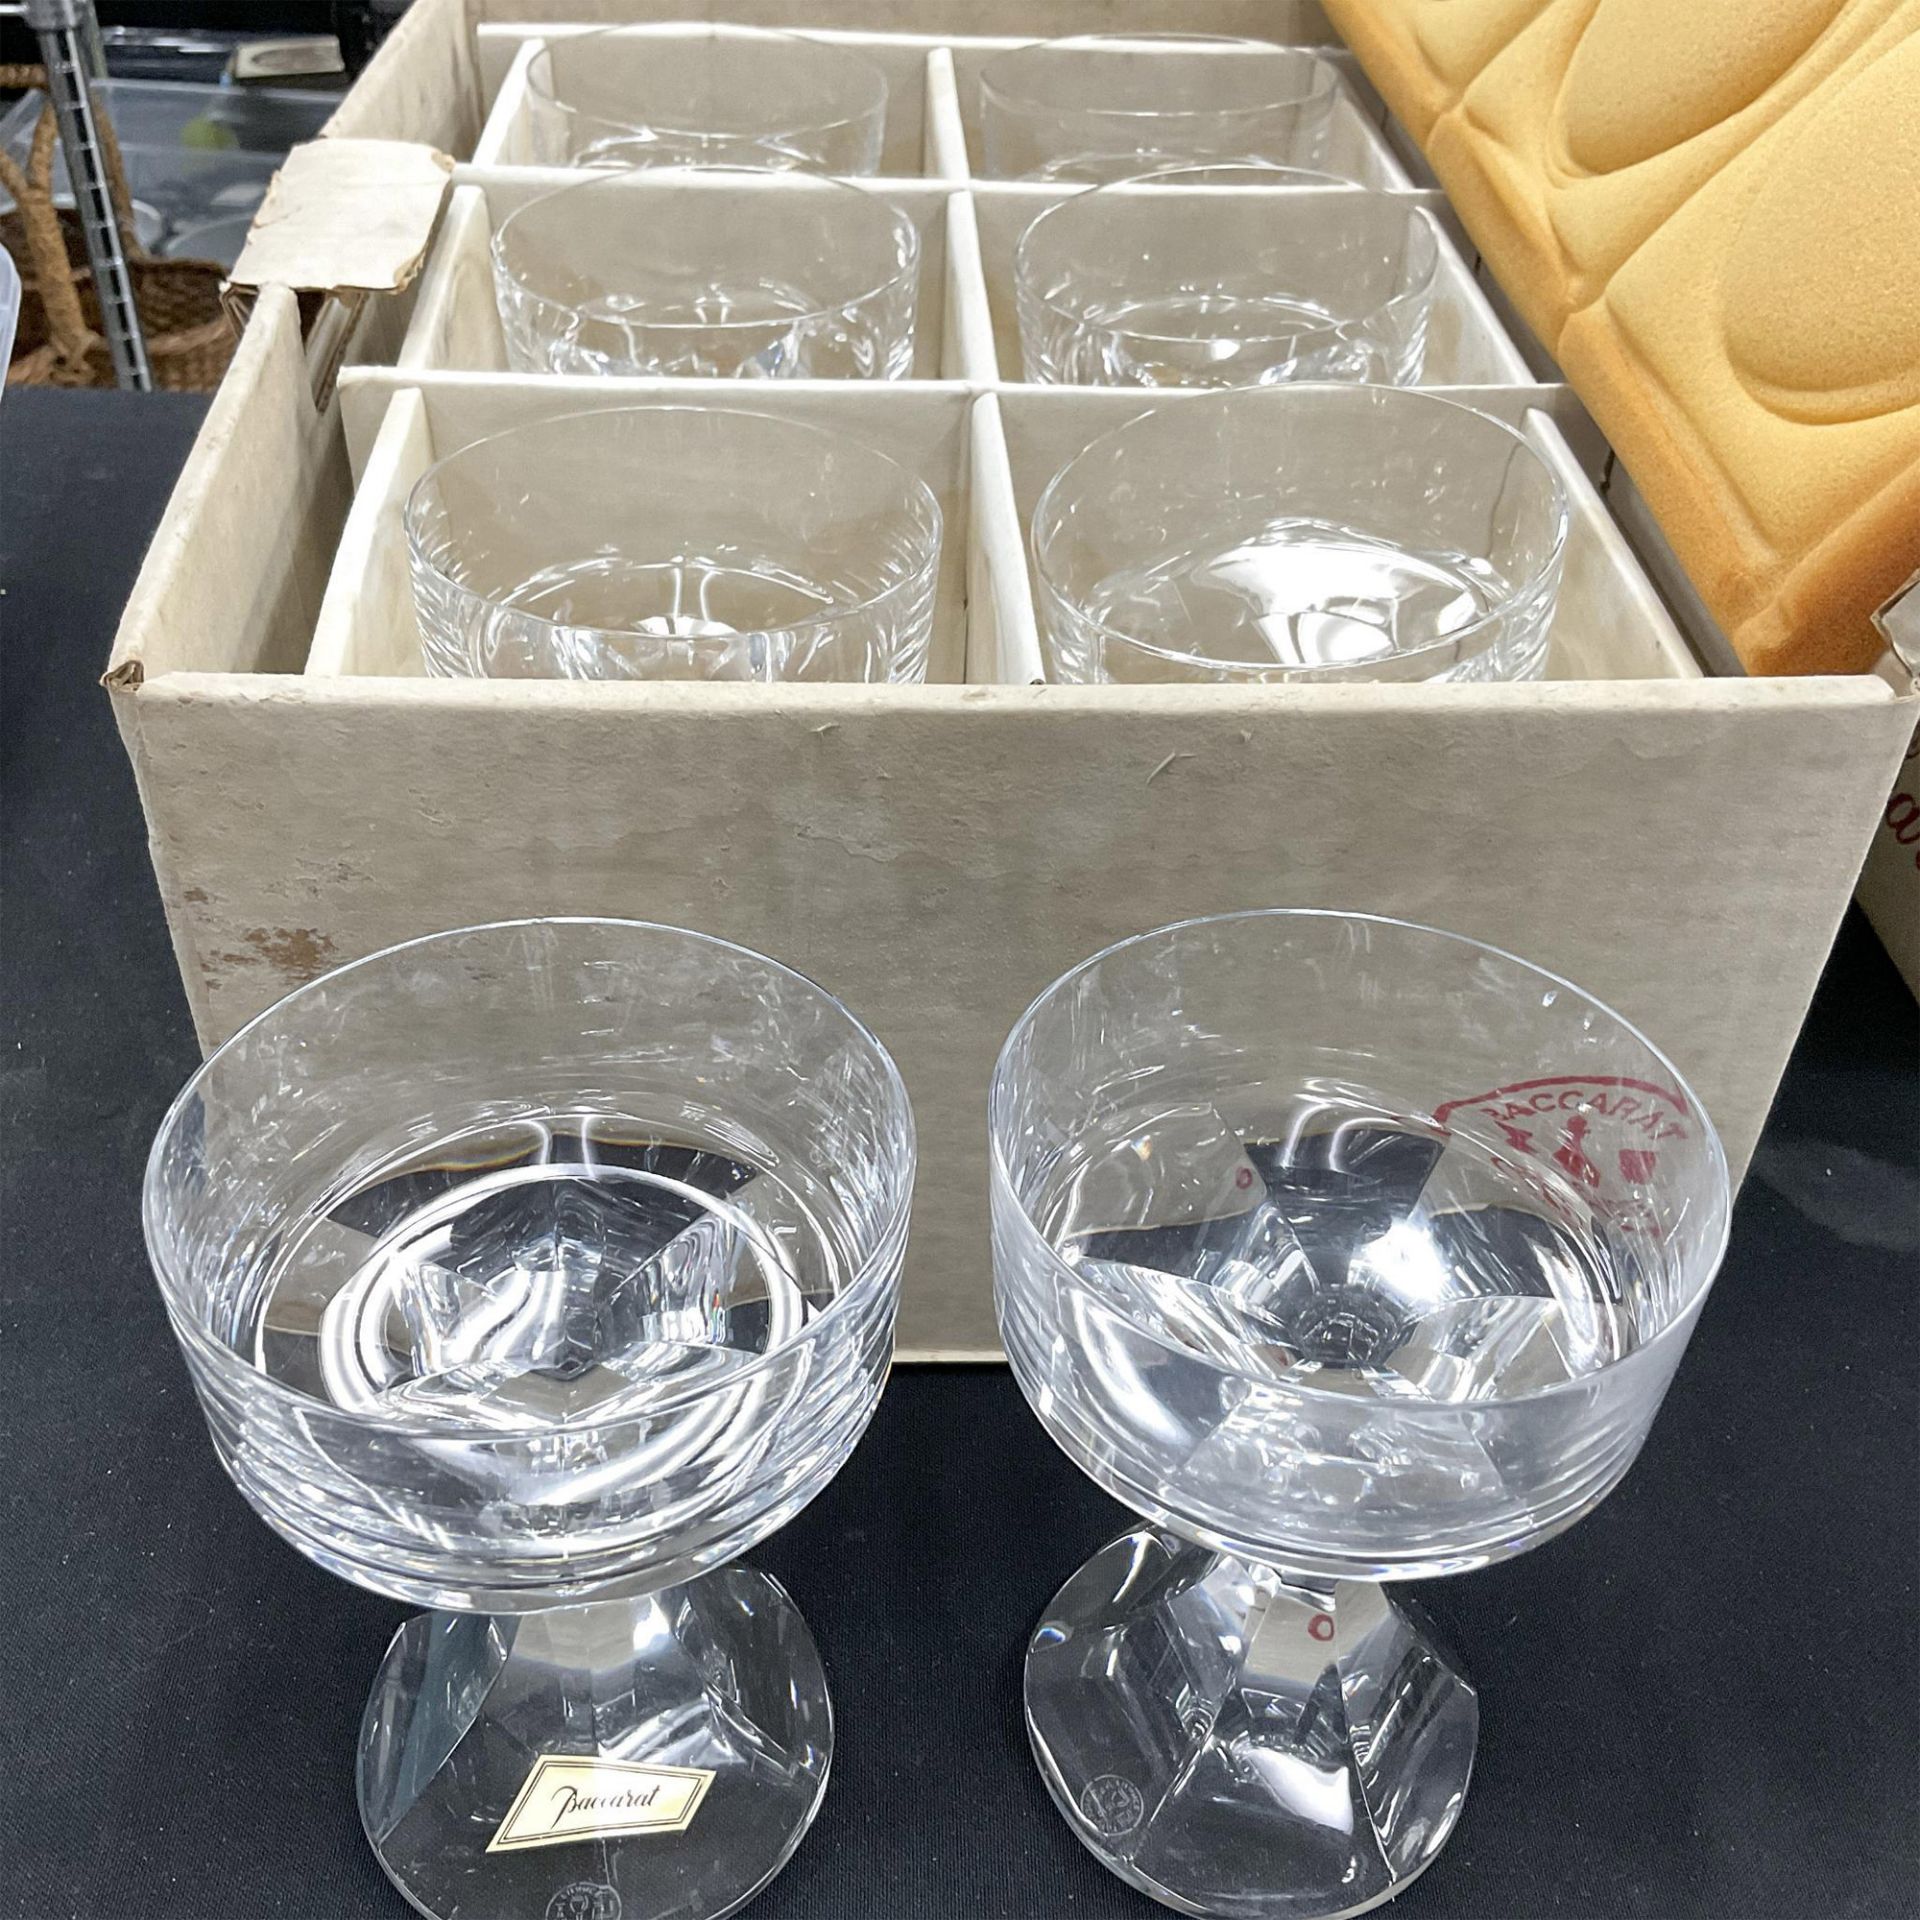 8pc Baccarat Crystal Champagne Coupes, Narcisse - Image 4 of 4